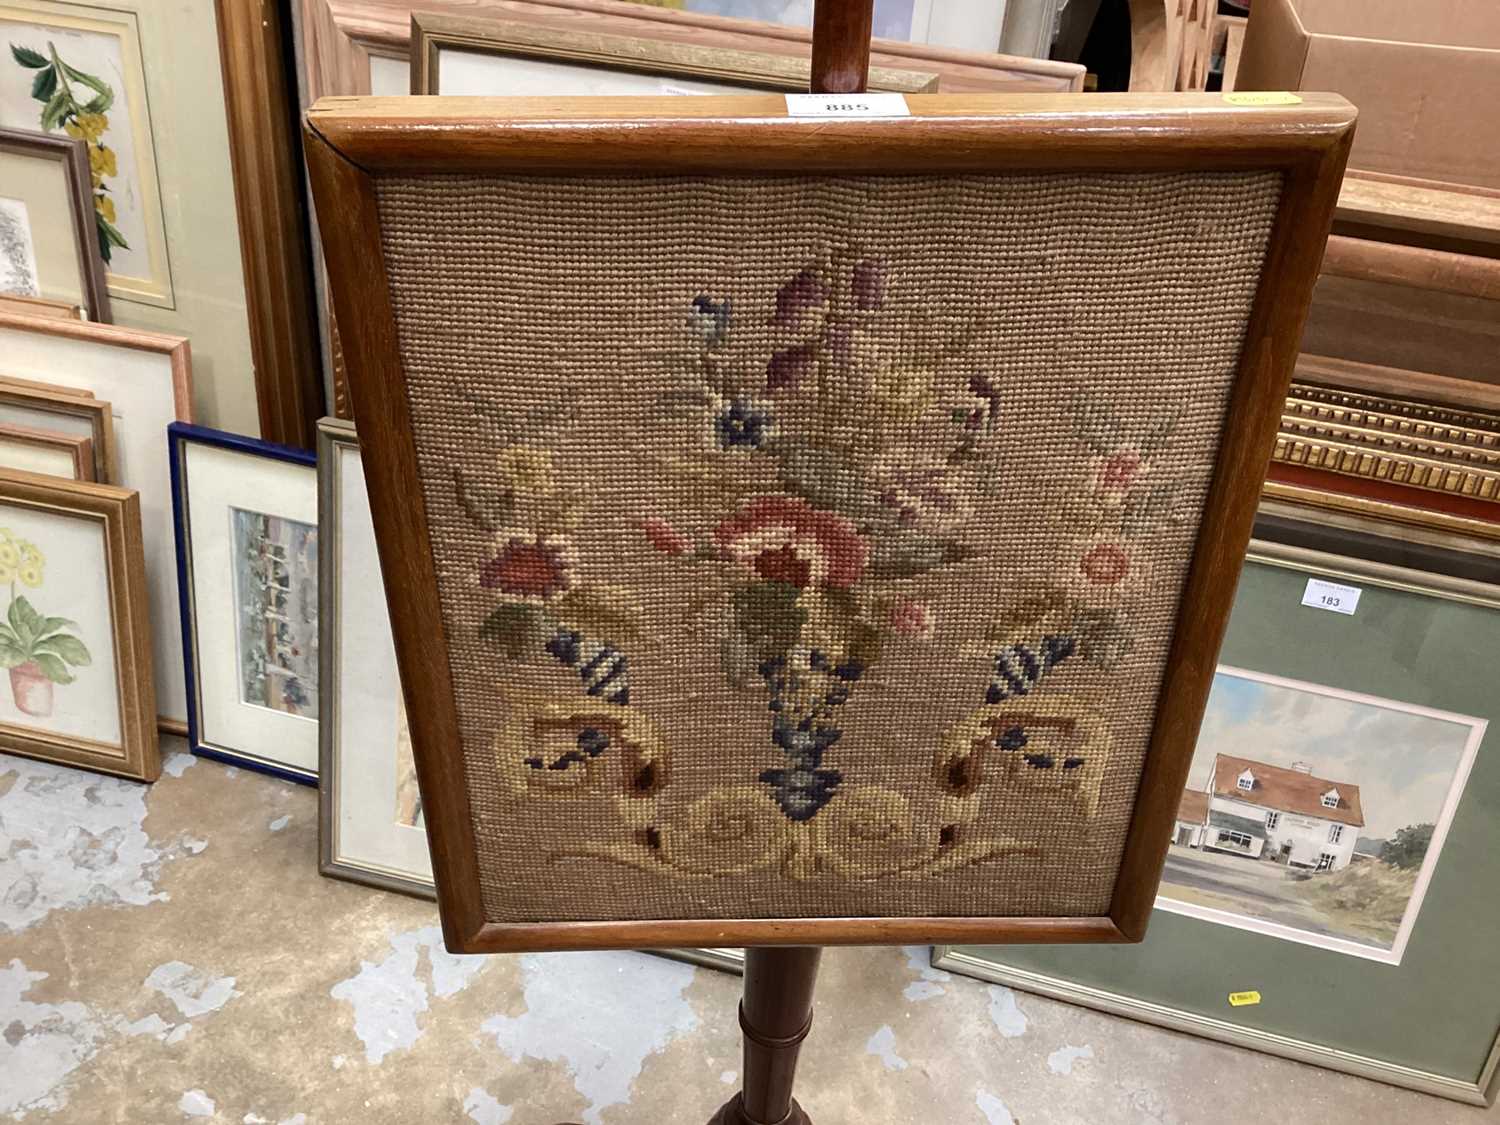 19th centyury mahogany pole screen with embroided floral panel - Image 2 of 5